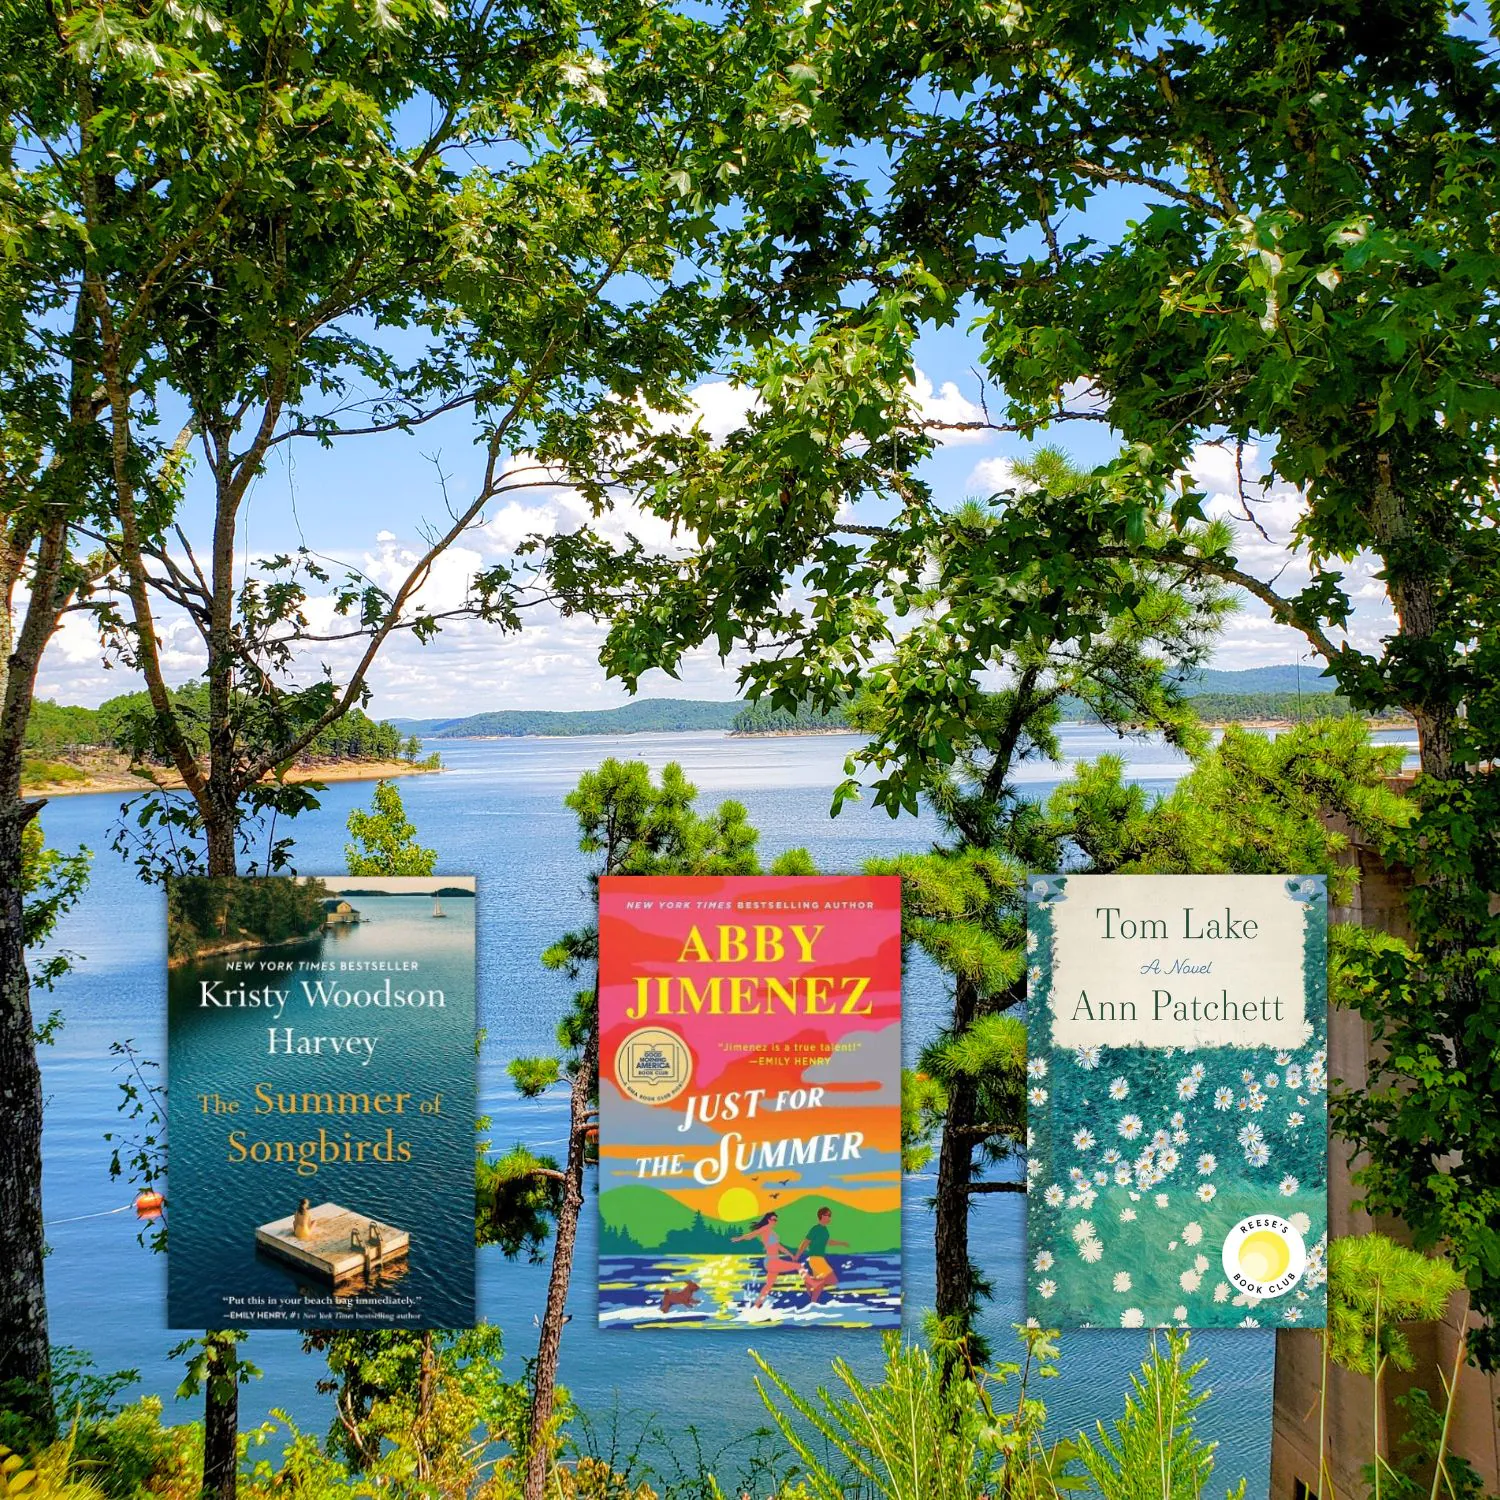 Three book covers or novels set at lakes overlayed on an image of a tranquil lake